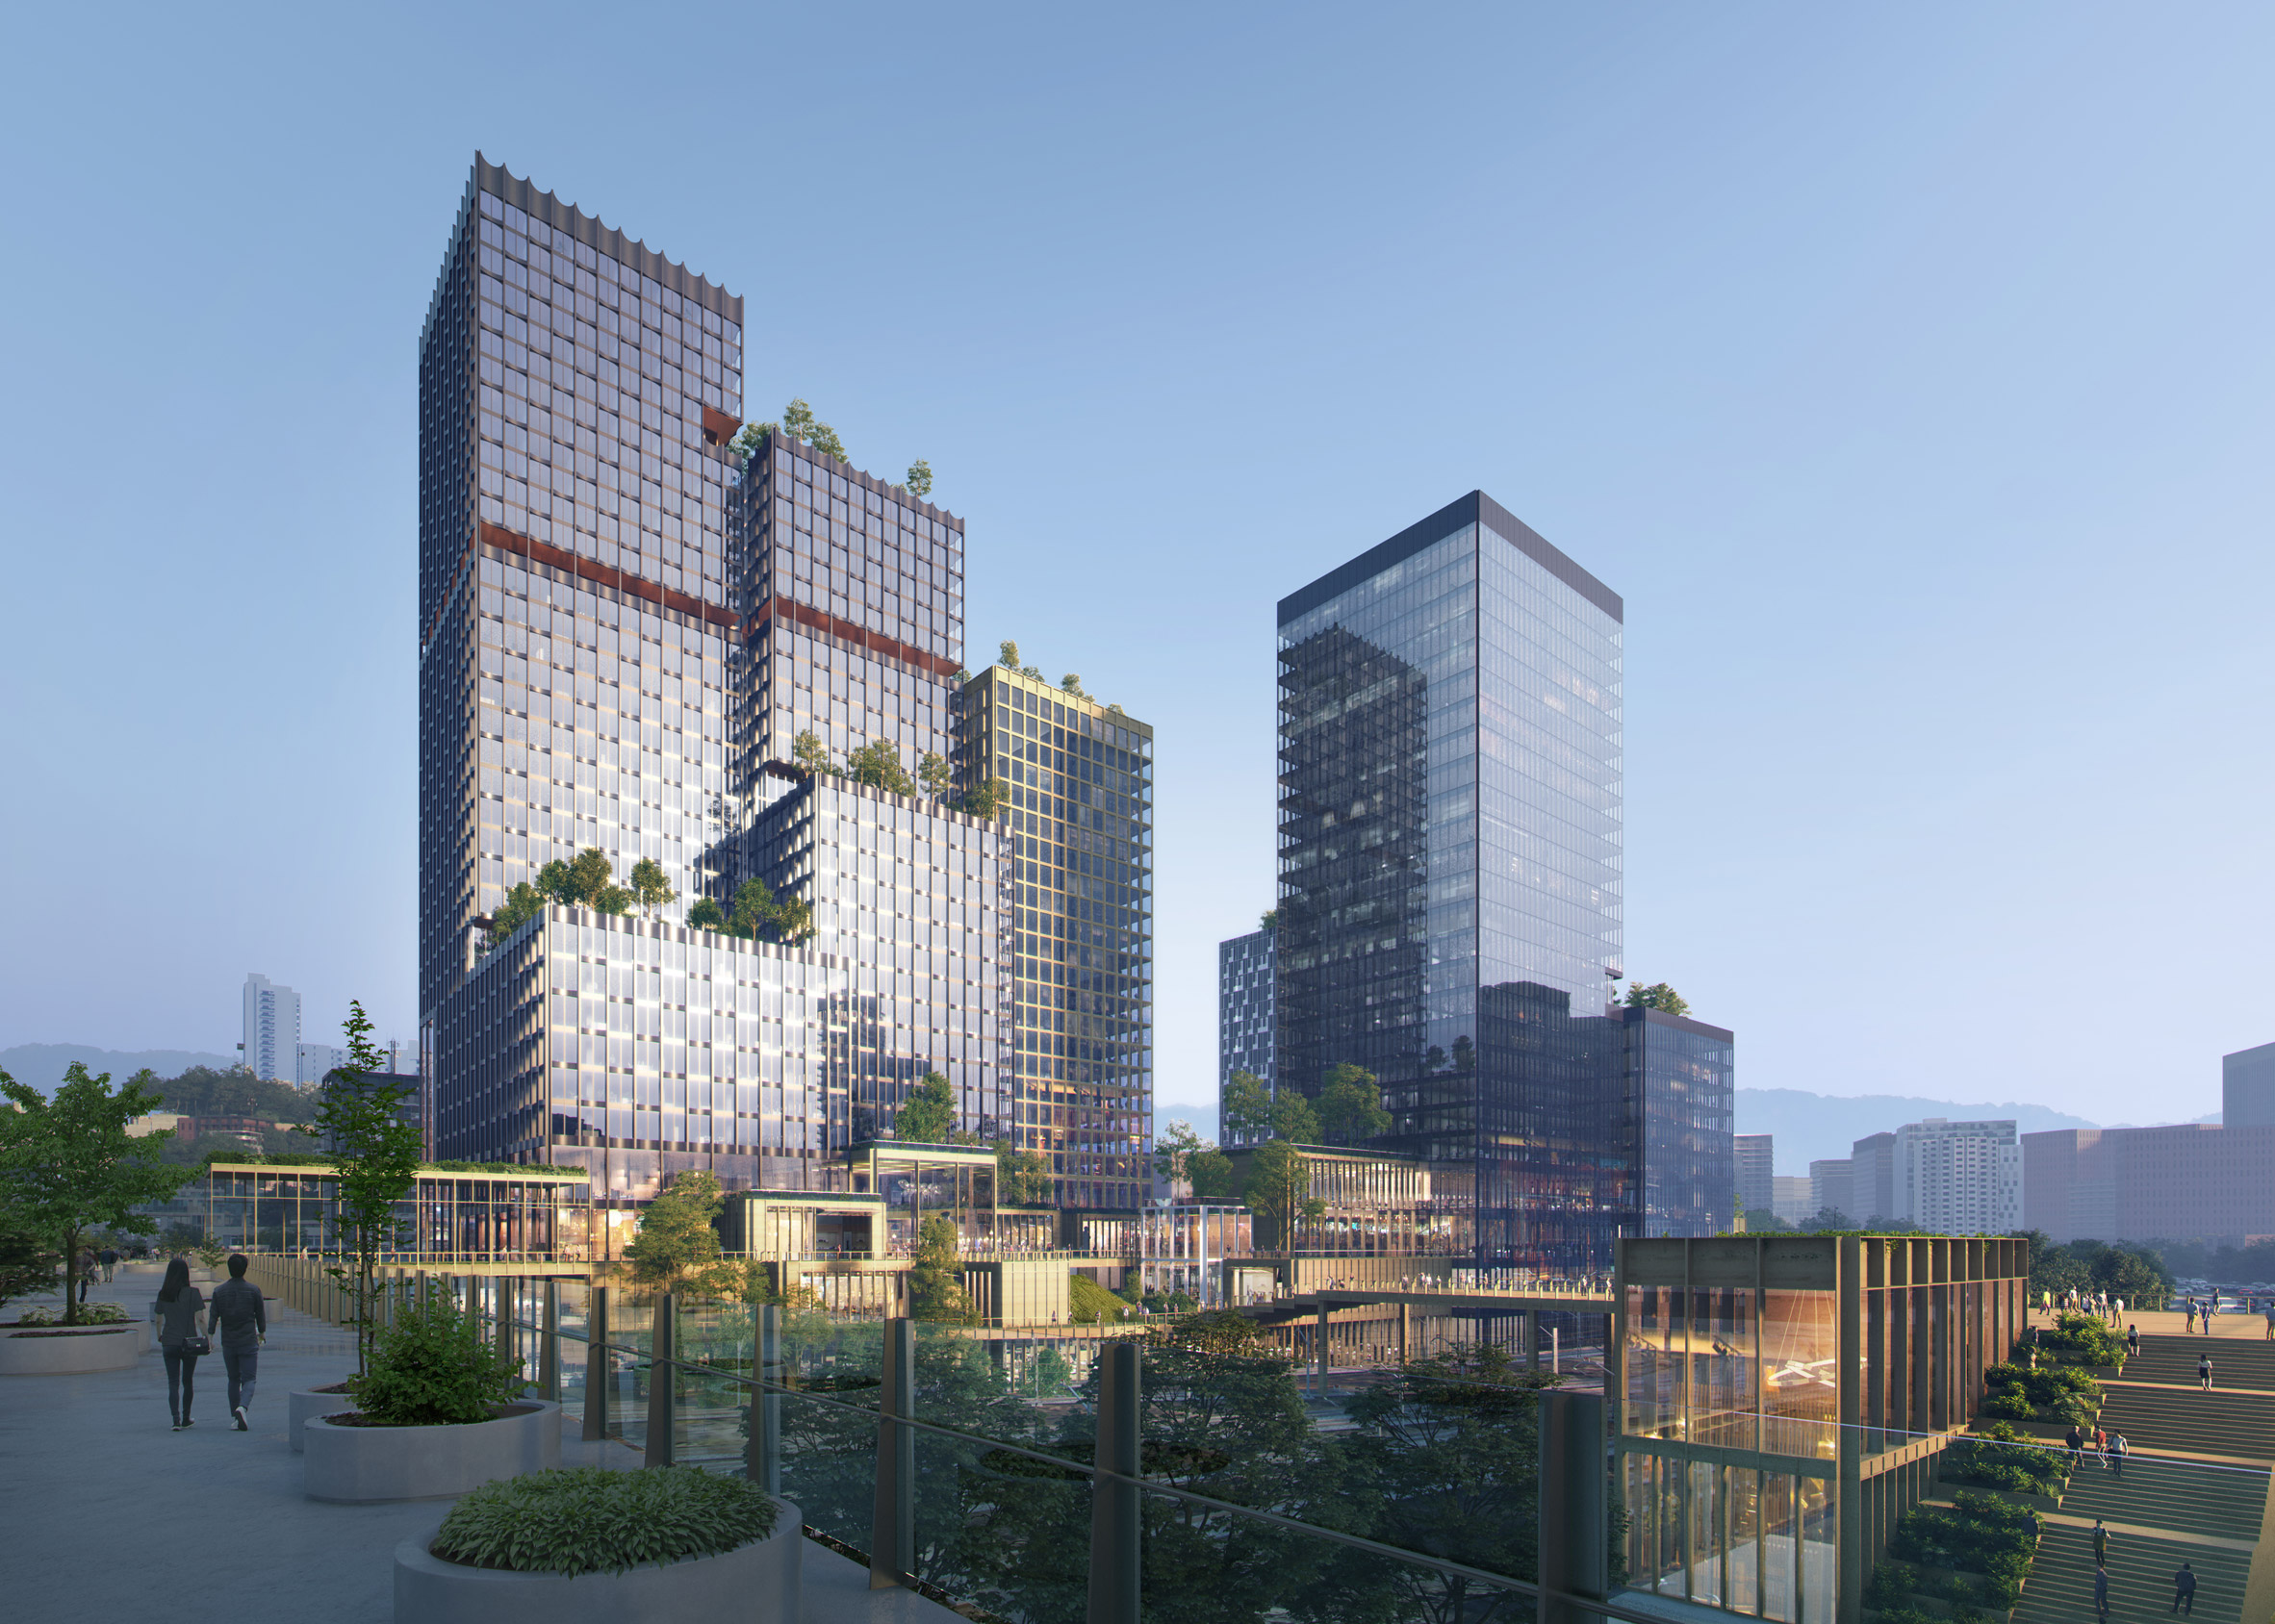 A cluster of towers in Henning Larsen's Seoul Valley proposal for South Korea